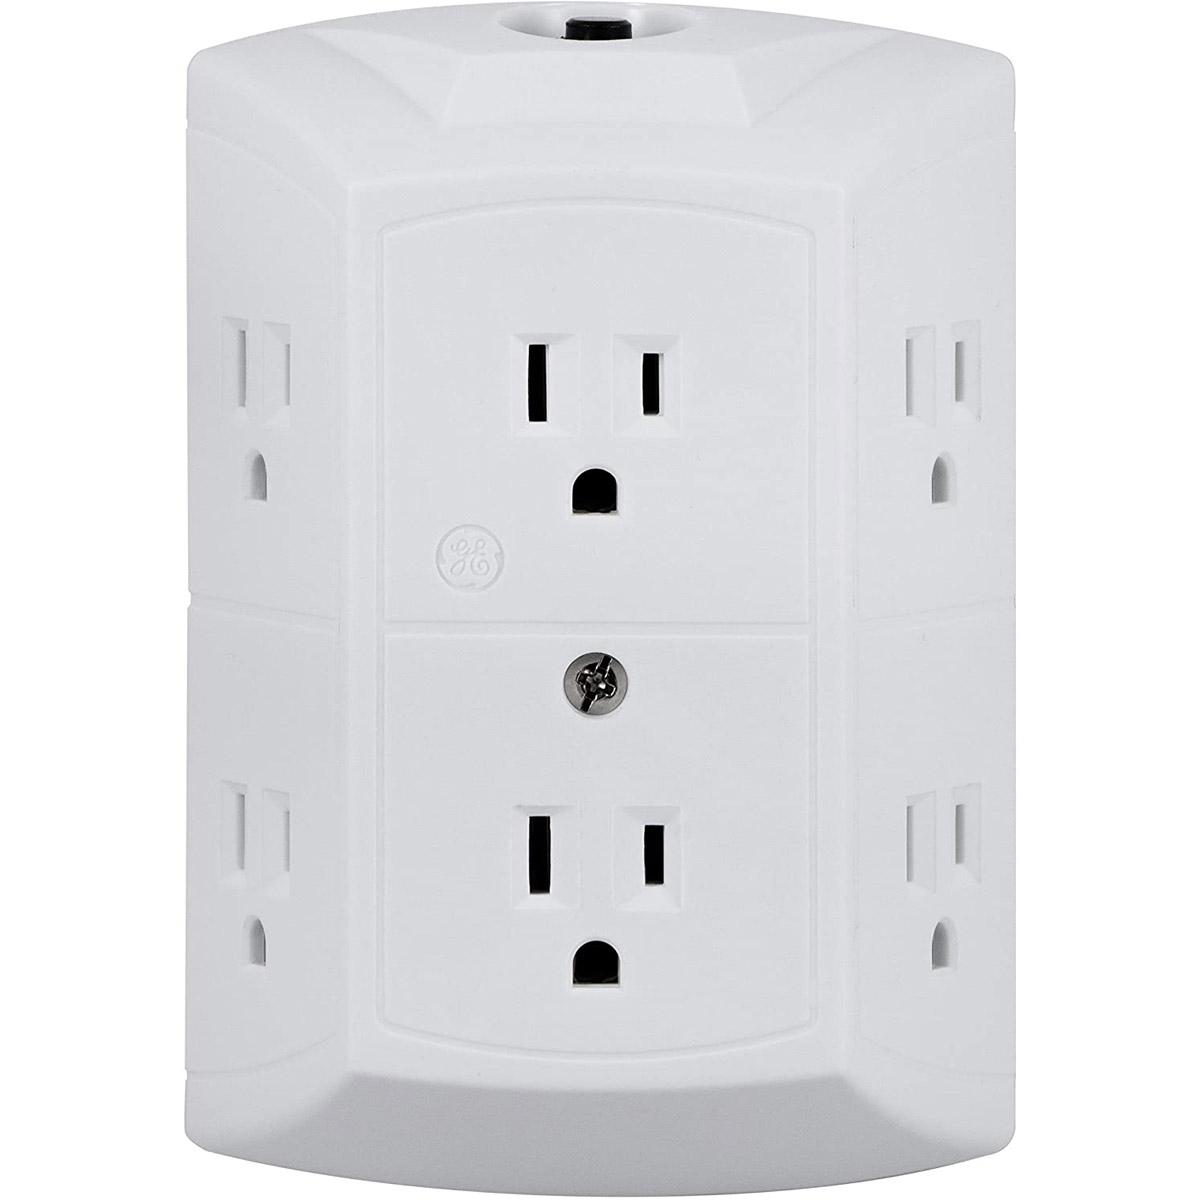 GE 6-Outlet Wall Tap Power Outlet Extender for $5.97